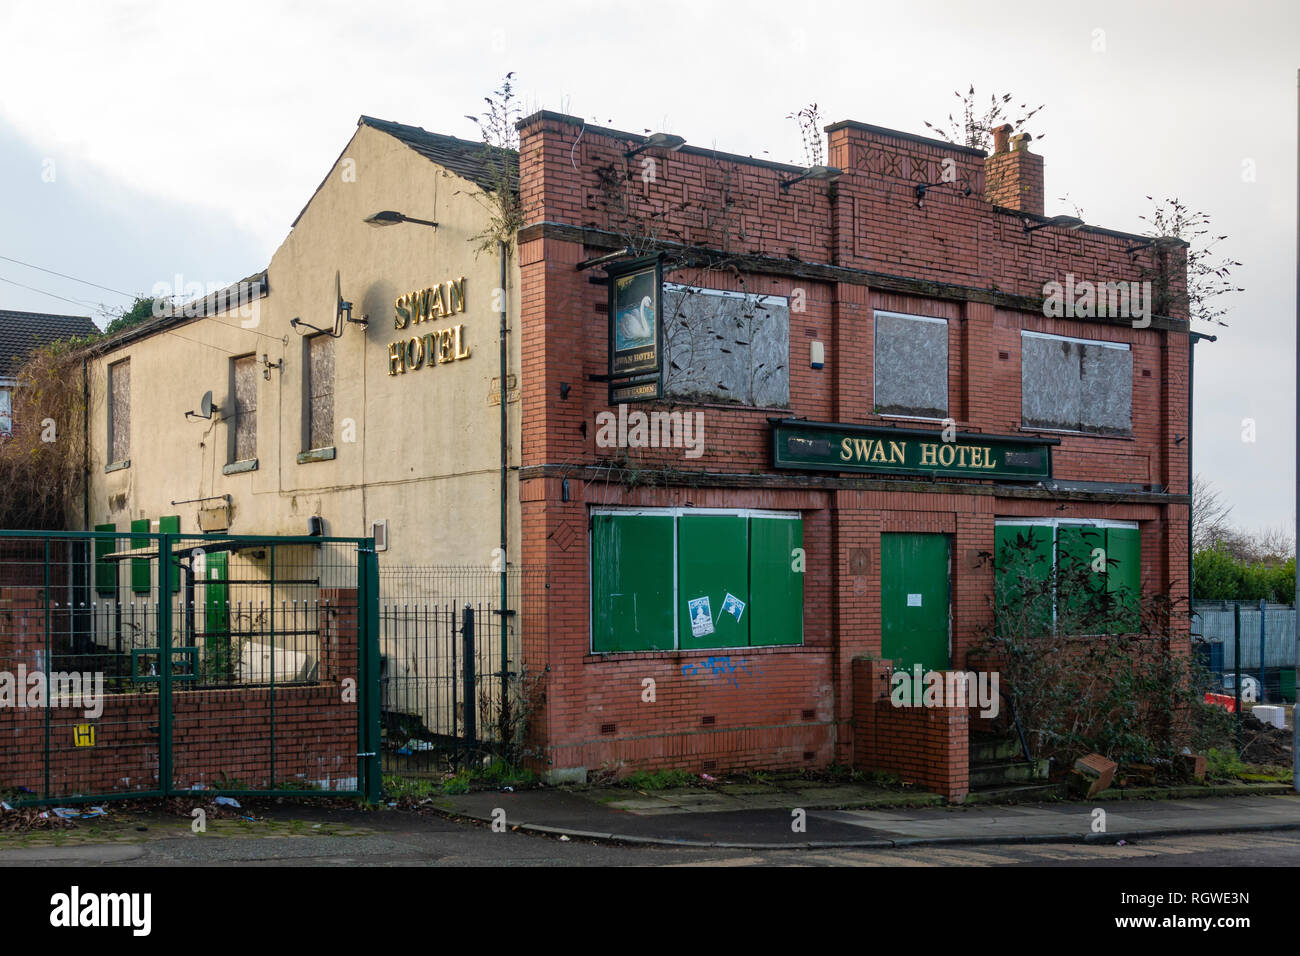 Swan Hotel public house in Radcliffe, closed and boarded up Stock Photo